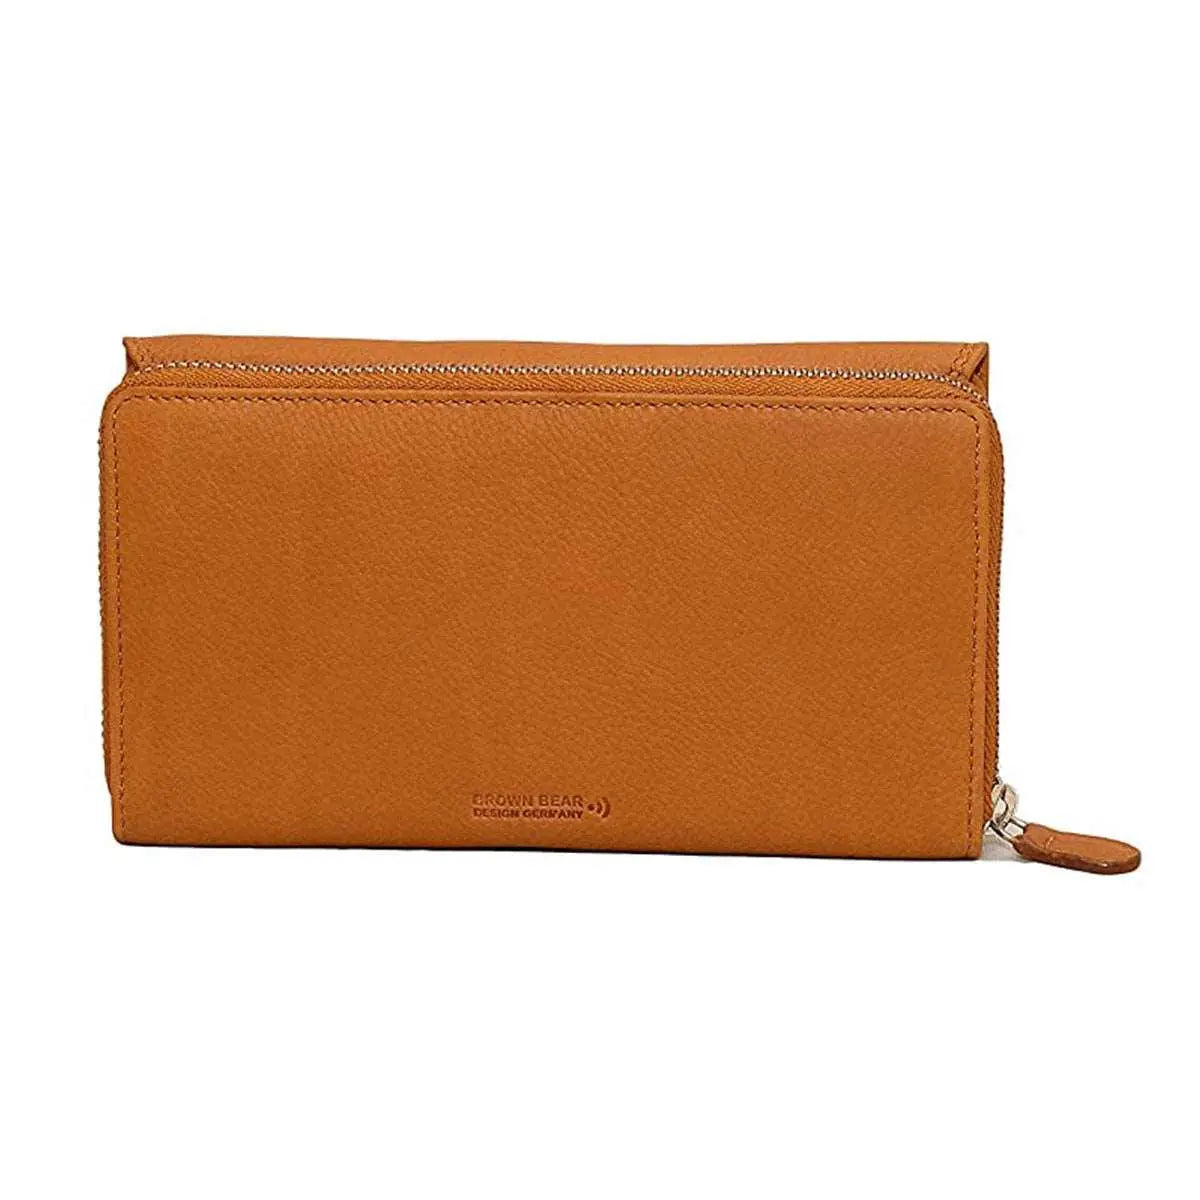 Buy Designer Colorful Mimi Purse Ladies Wallet Orange Womens Wallets  Genuine Leather Button Close Purse M77 Mojito Online in India - Etsy